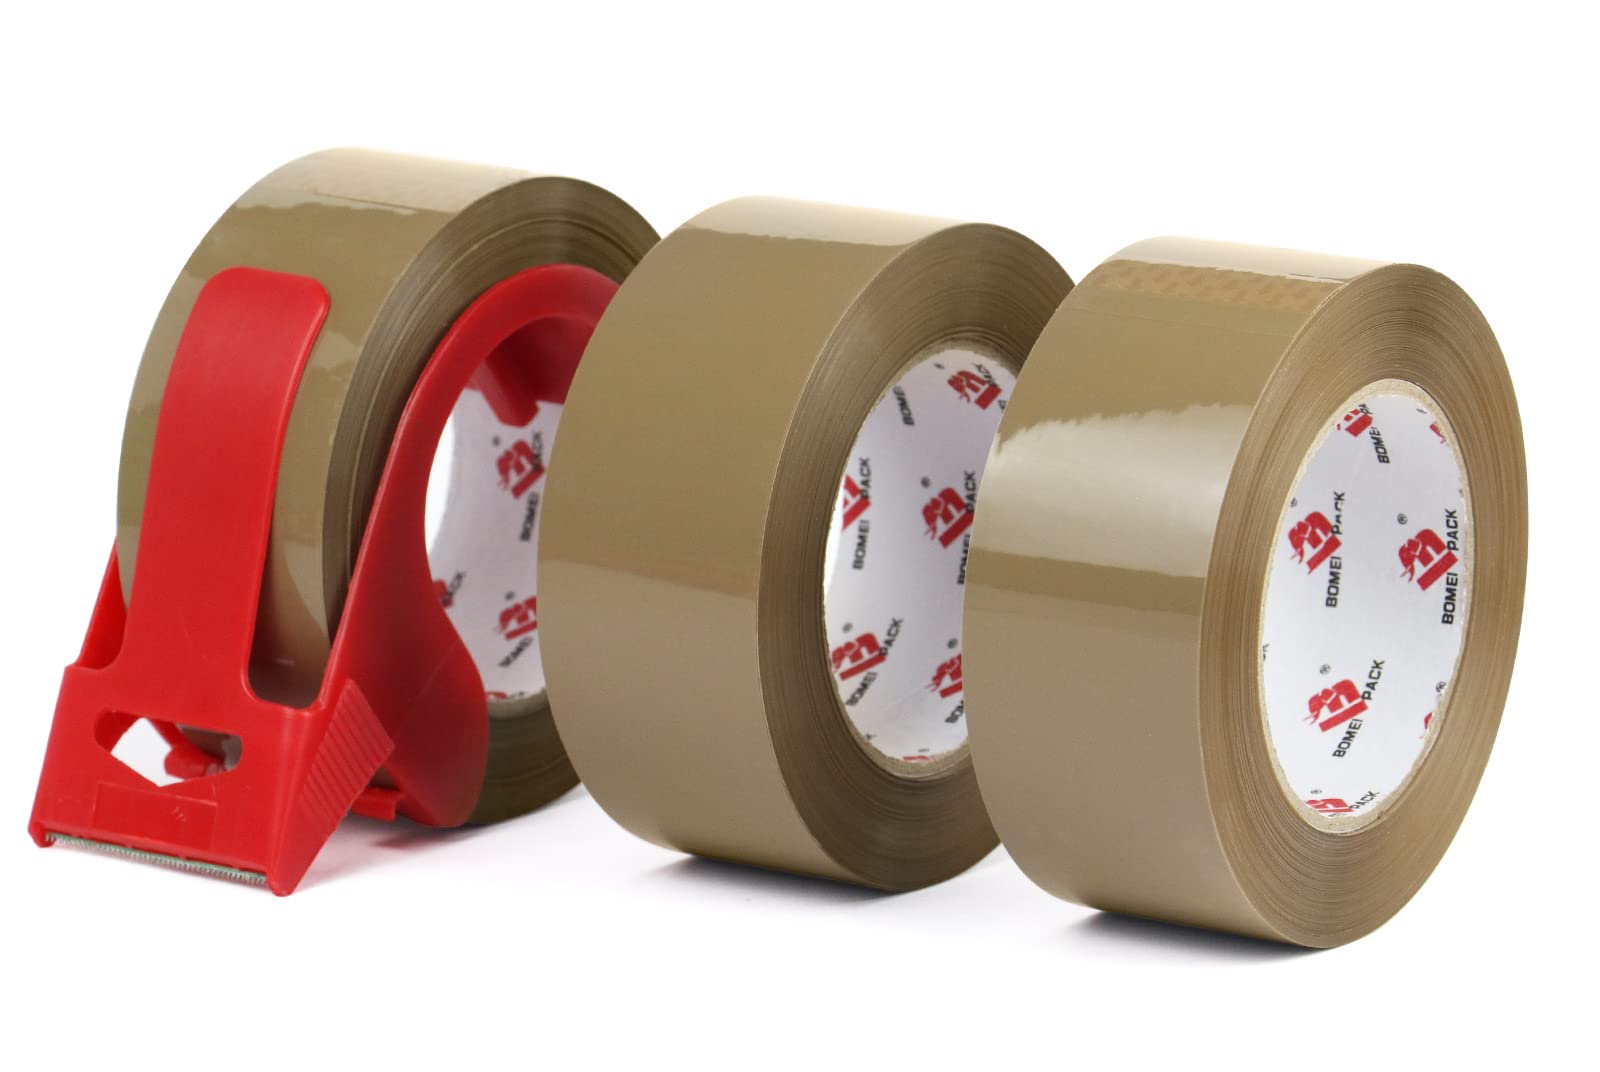 Strong Heavy Duty Roll Pack Brown Packaging Tape, Secure Sticky Sealing  Tape For Parcel Boxes, Moving Boxes, Large Postal Bags For Long Term  Storage